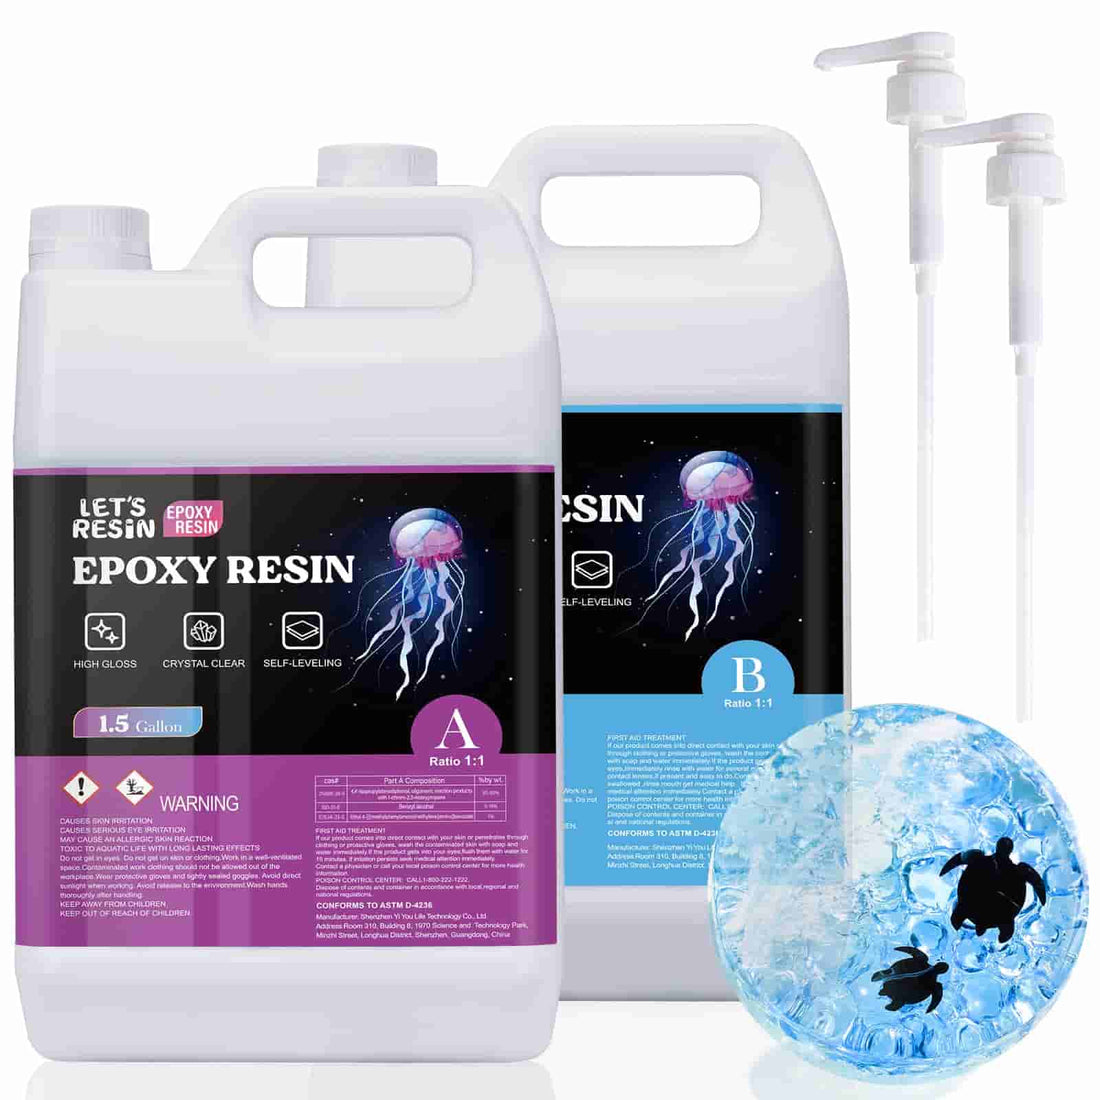 3 Gallon Epoxy Resin Kit with Pumps